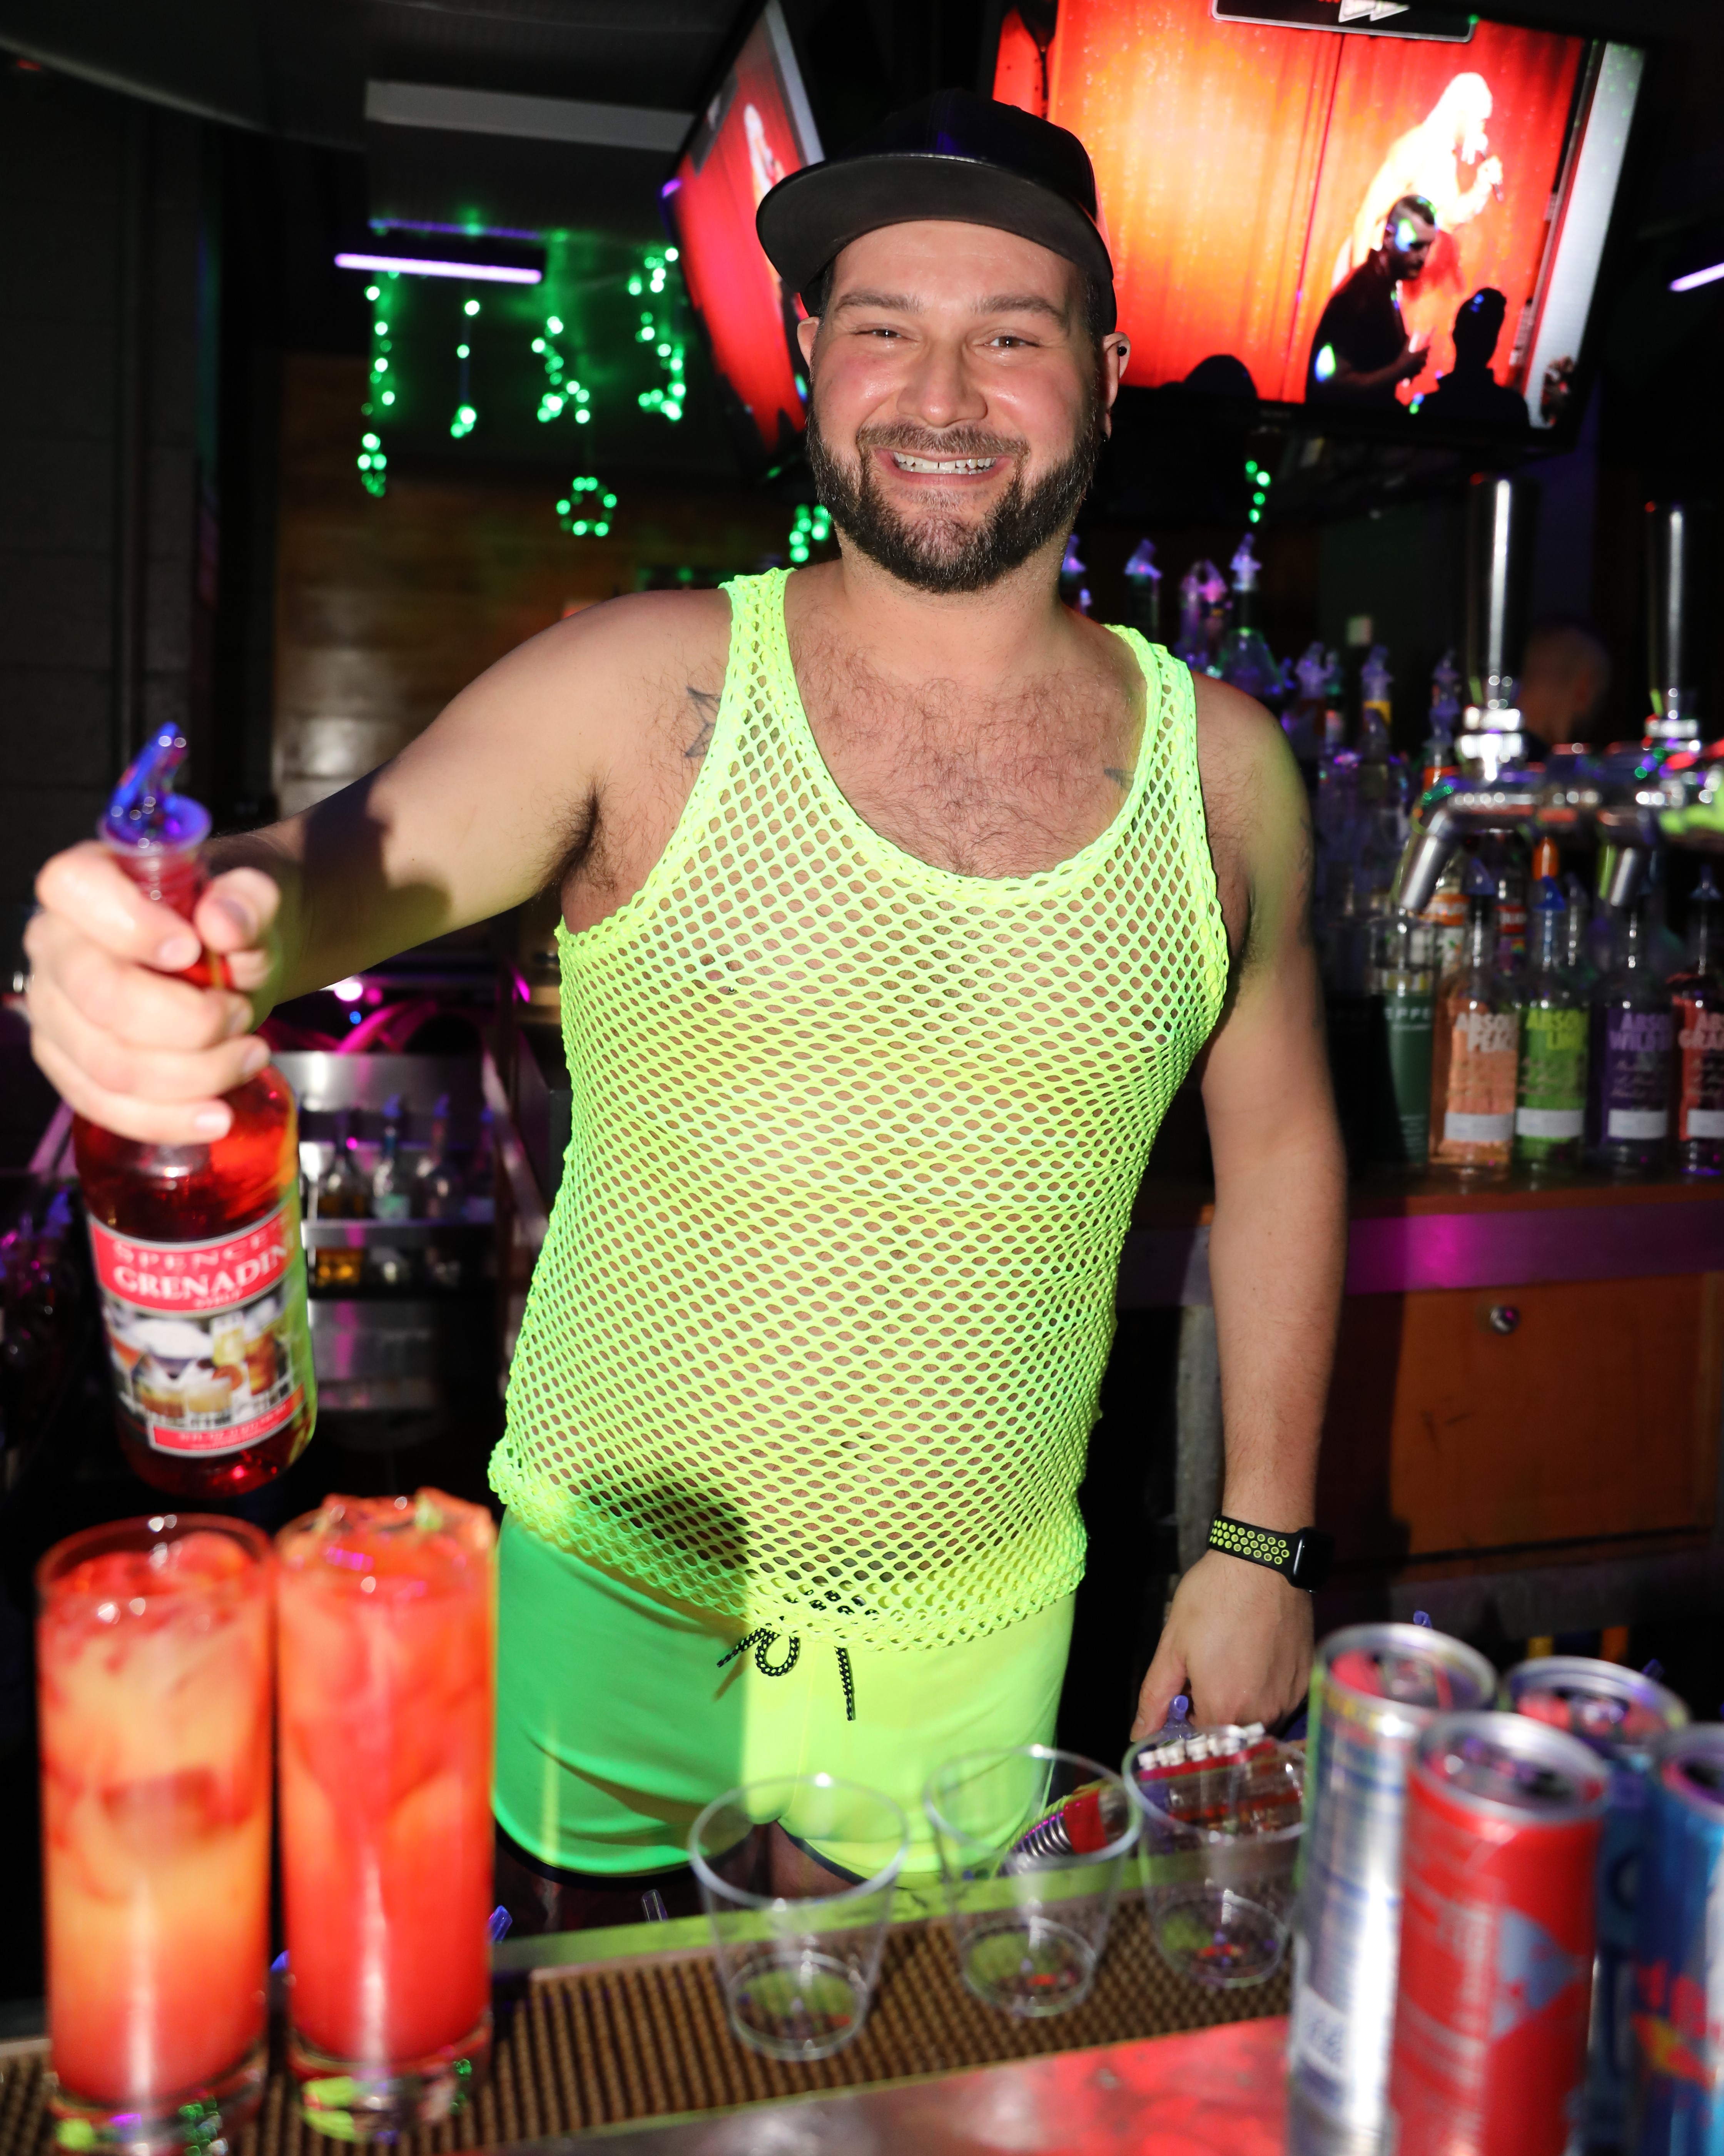 St. Patrick's Day Weekend at Sidetrack